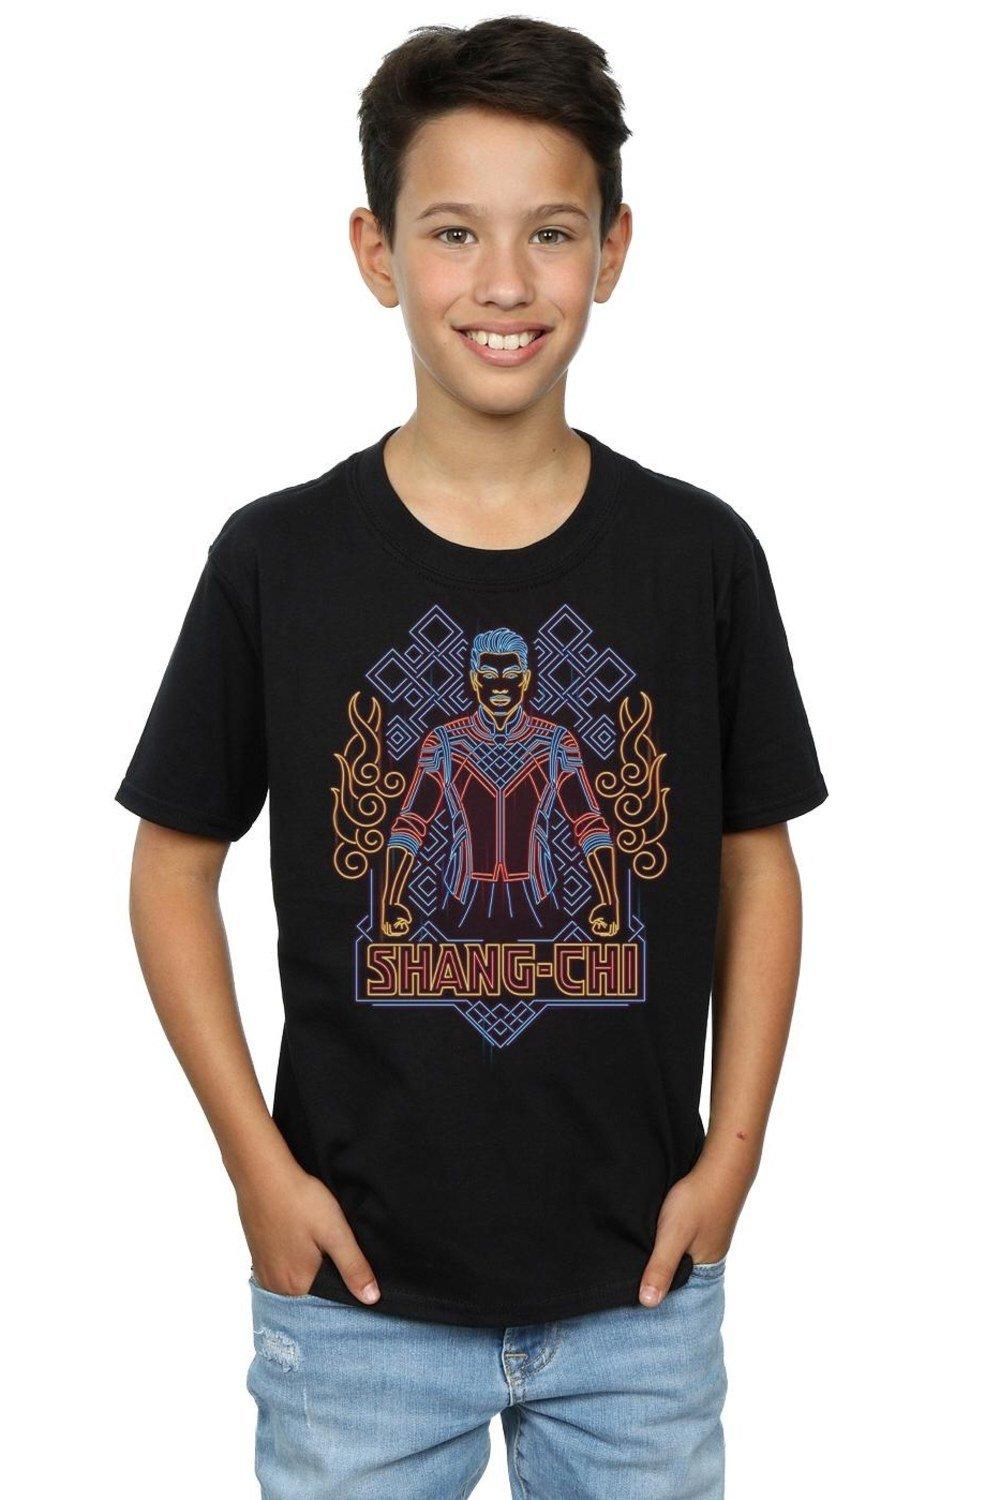 Shang-Chi And The Legend Of The Ten Rings Neon T-Shirt